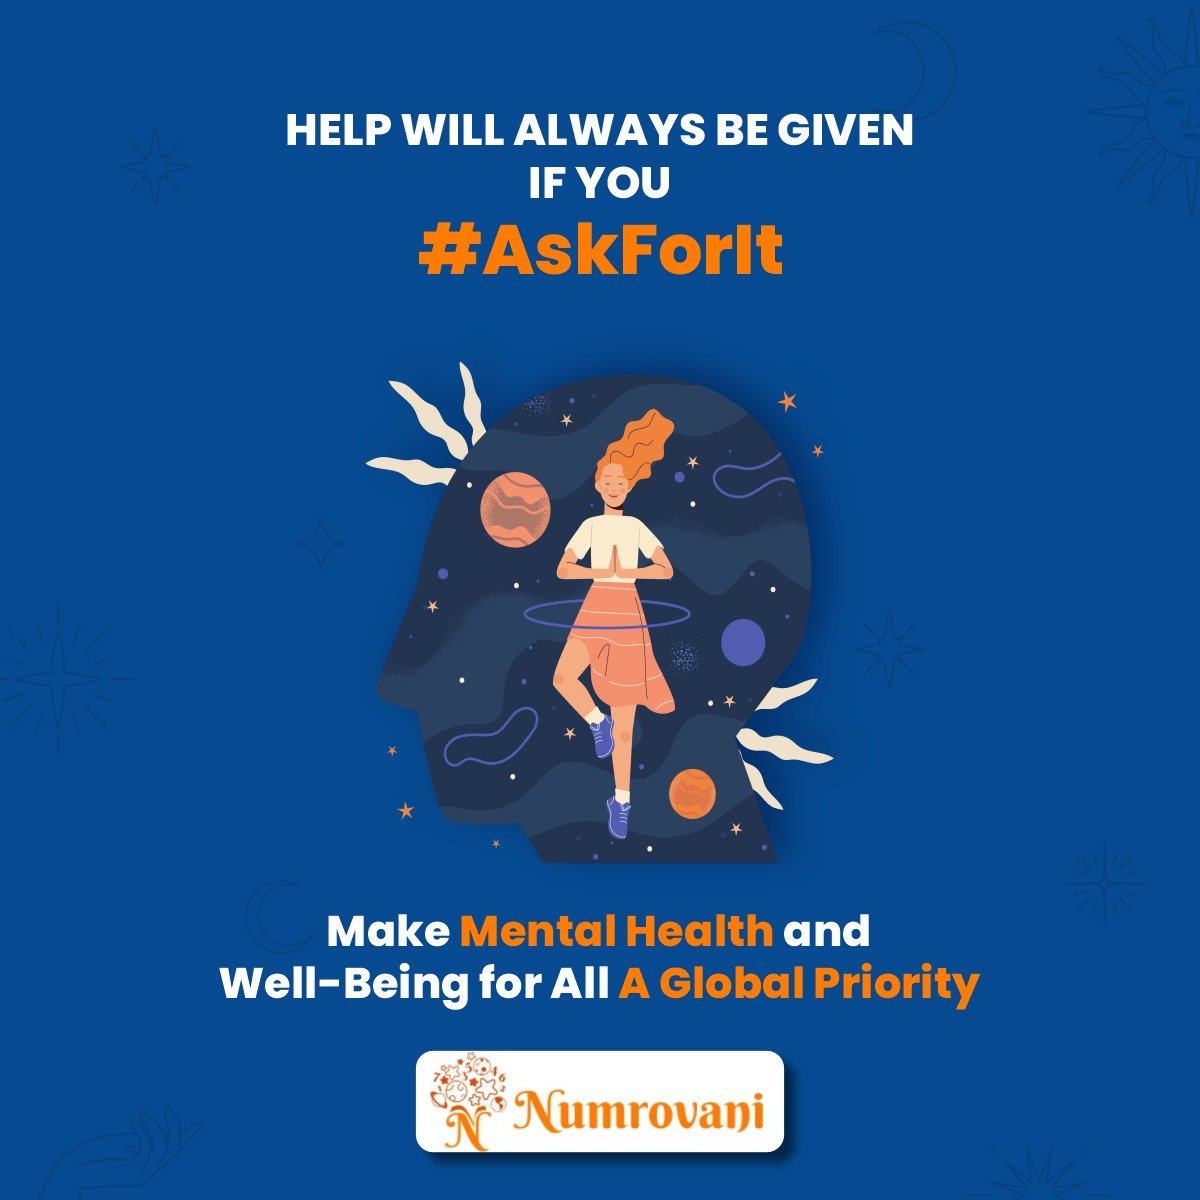 This Mental Health Day, NumroVani Launched Social Media Campaign #AskForIt